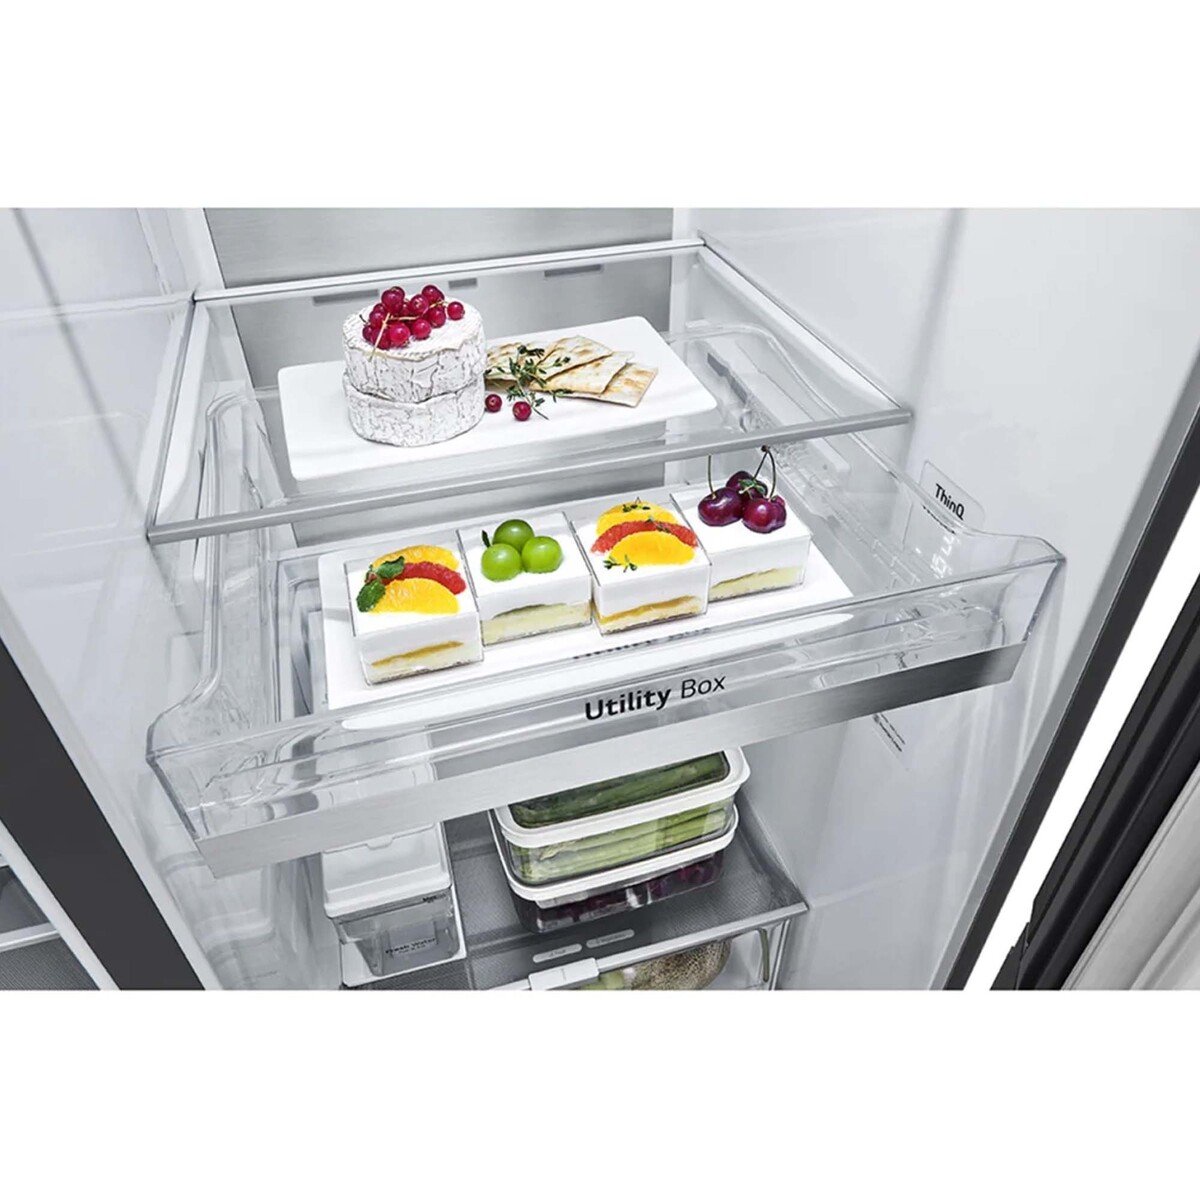 LG InstaView ThinQ Side by Side Refrigerator, UVnano, LINEARCooling GR-X267CQES 674Ltr